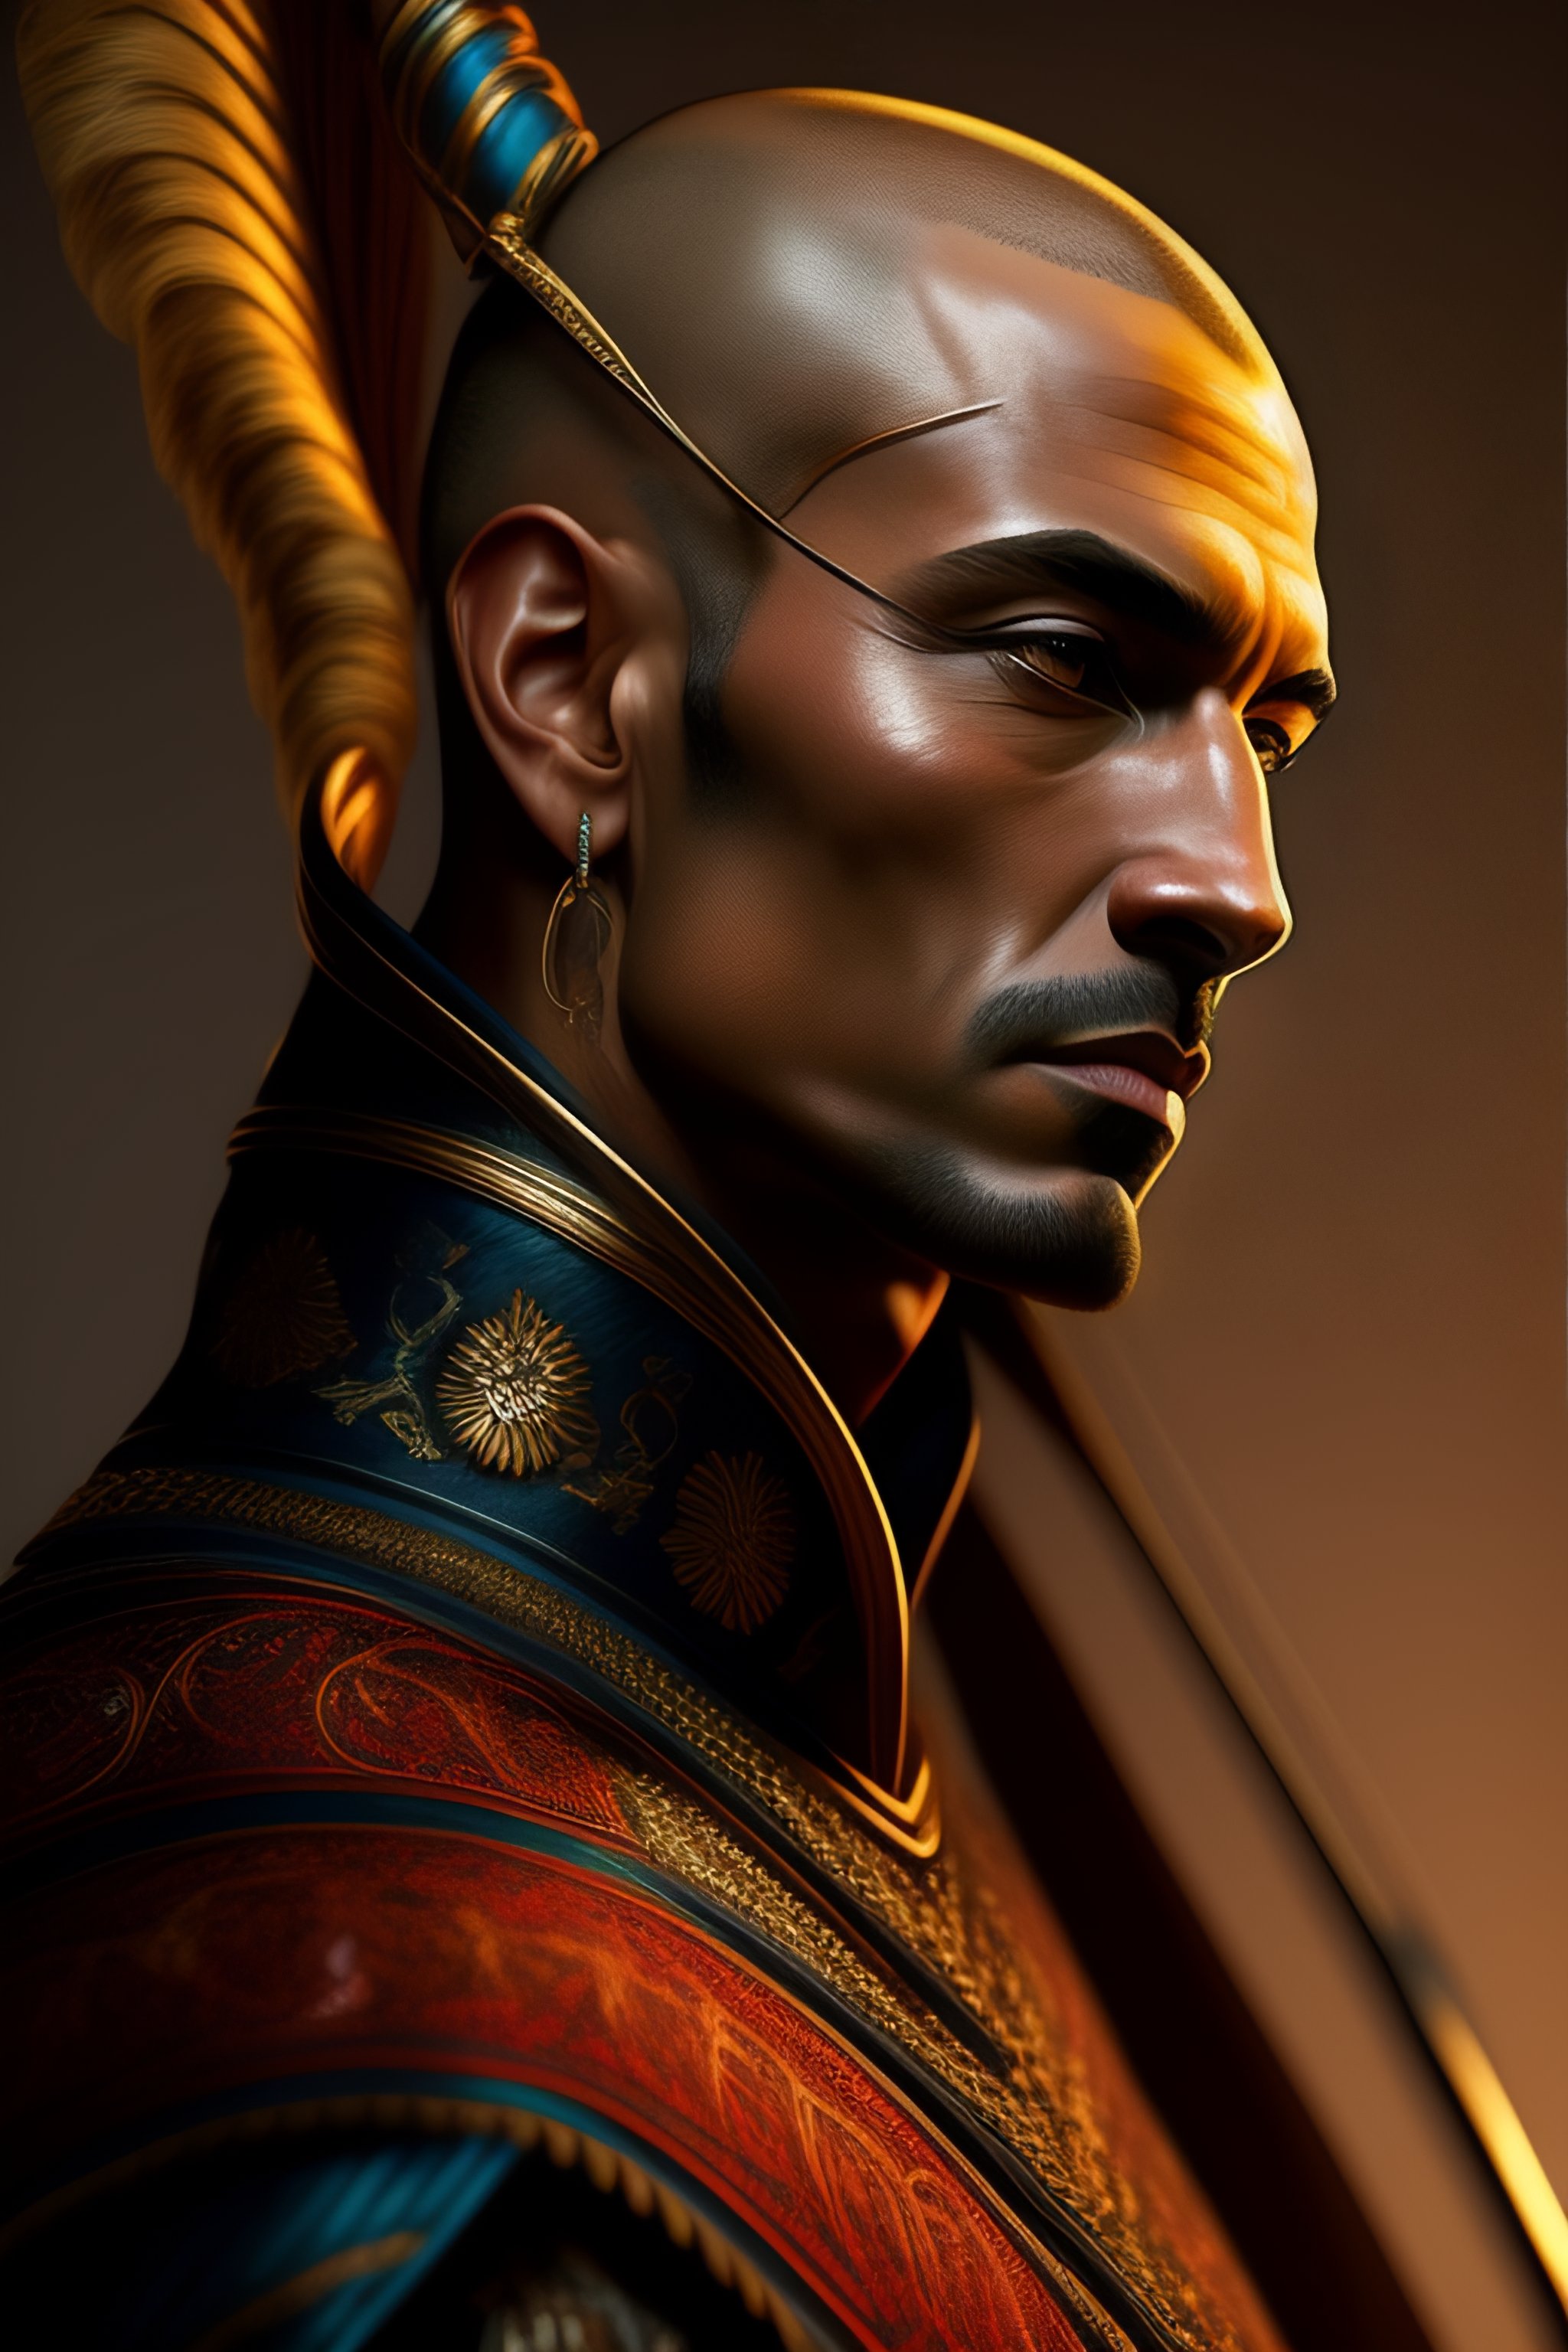 Lexica - A caucassian archer 45 years old, shaved head, intricate ...